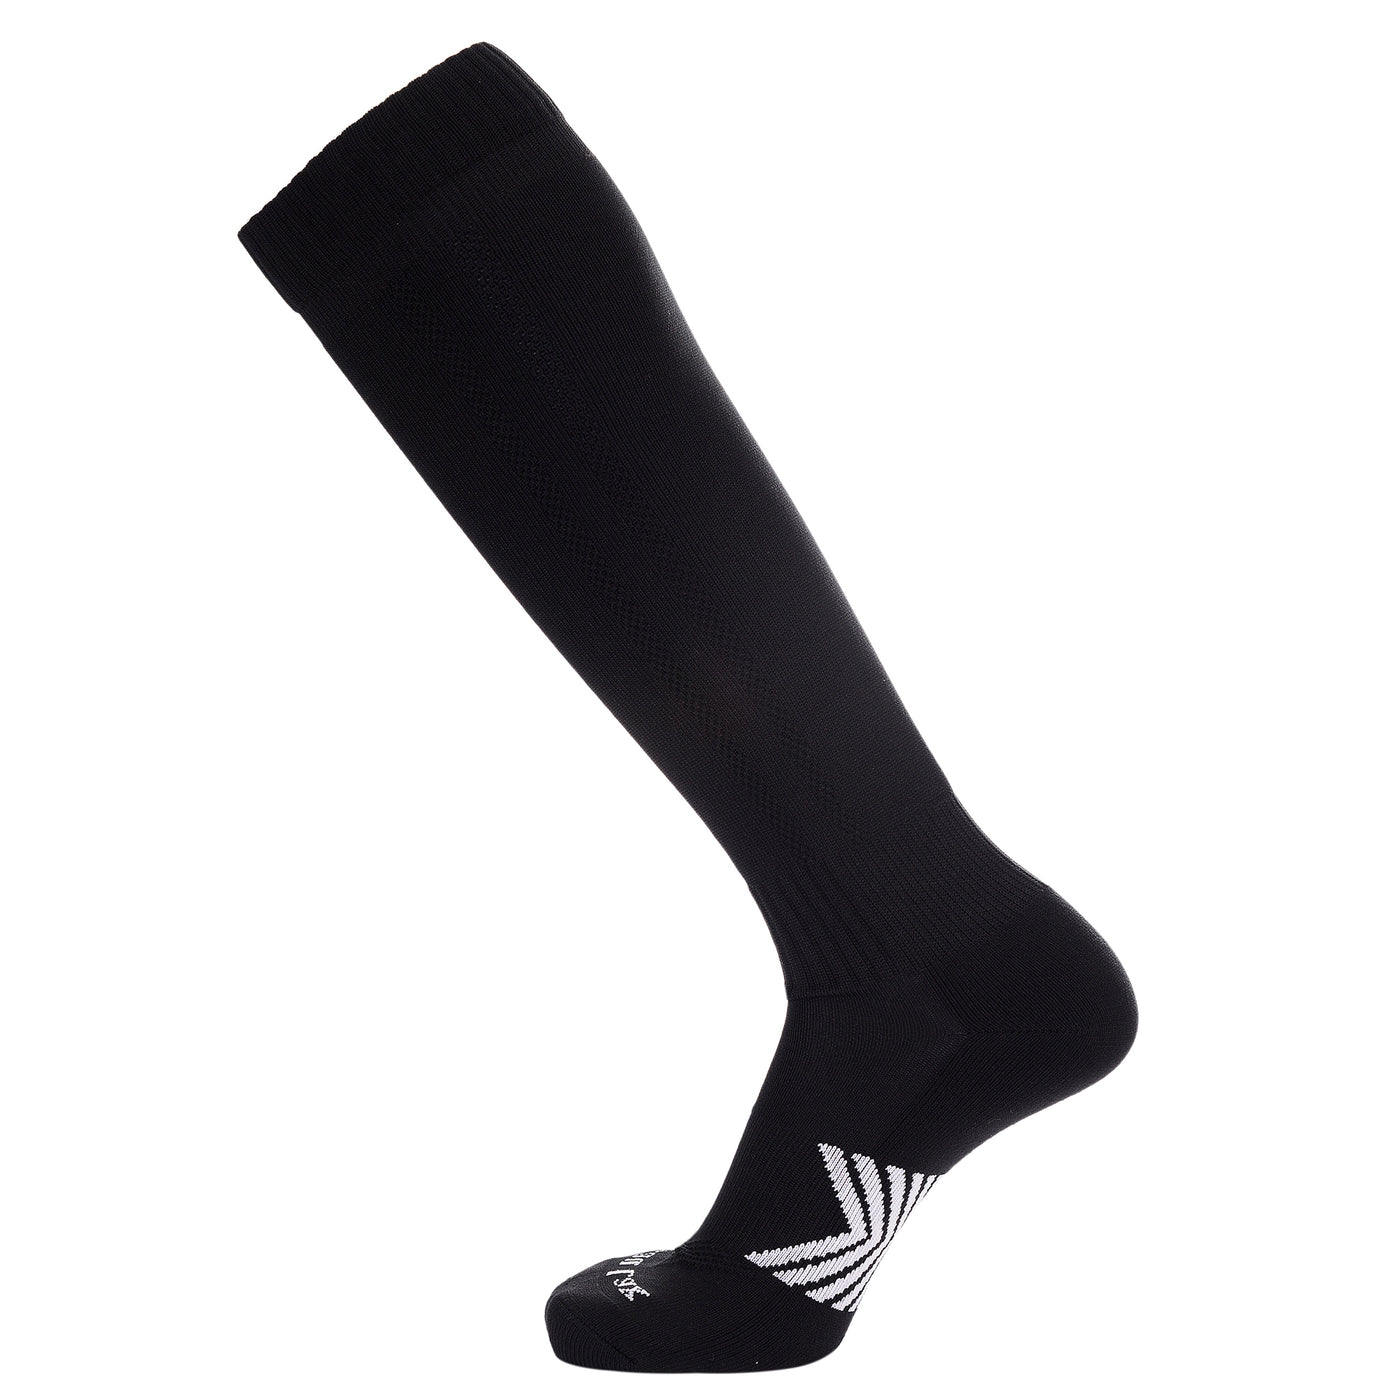 Laulax 8 Pairs Mens Coolmax Professional Football Socks in multiple colours, Size UK 7 - 11 / Europe 40 - 46